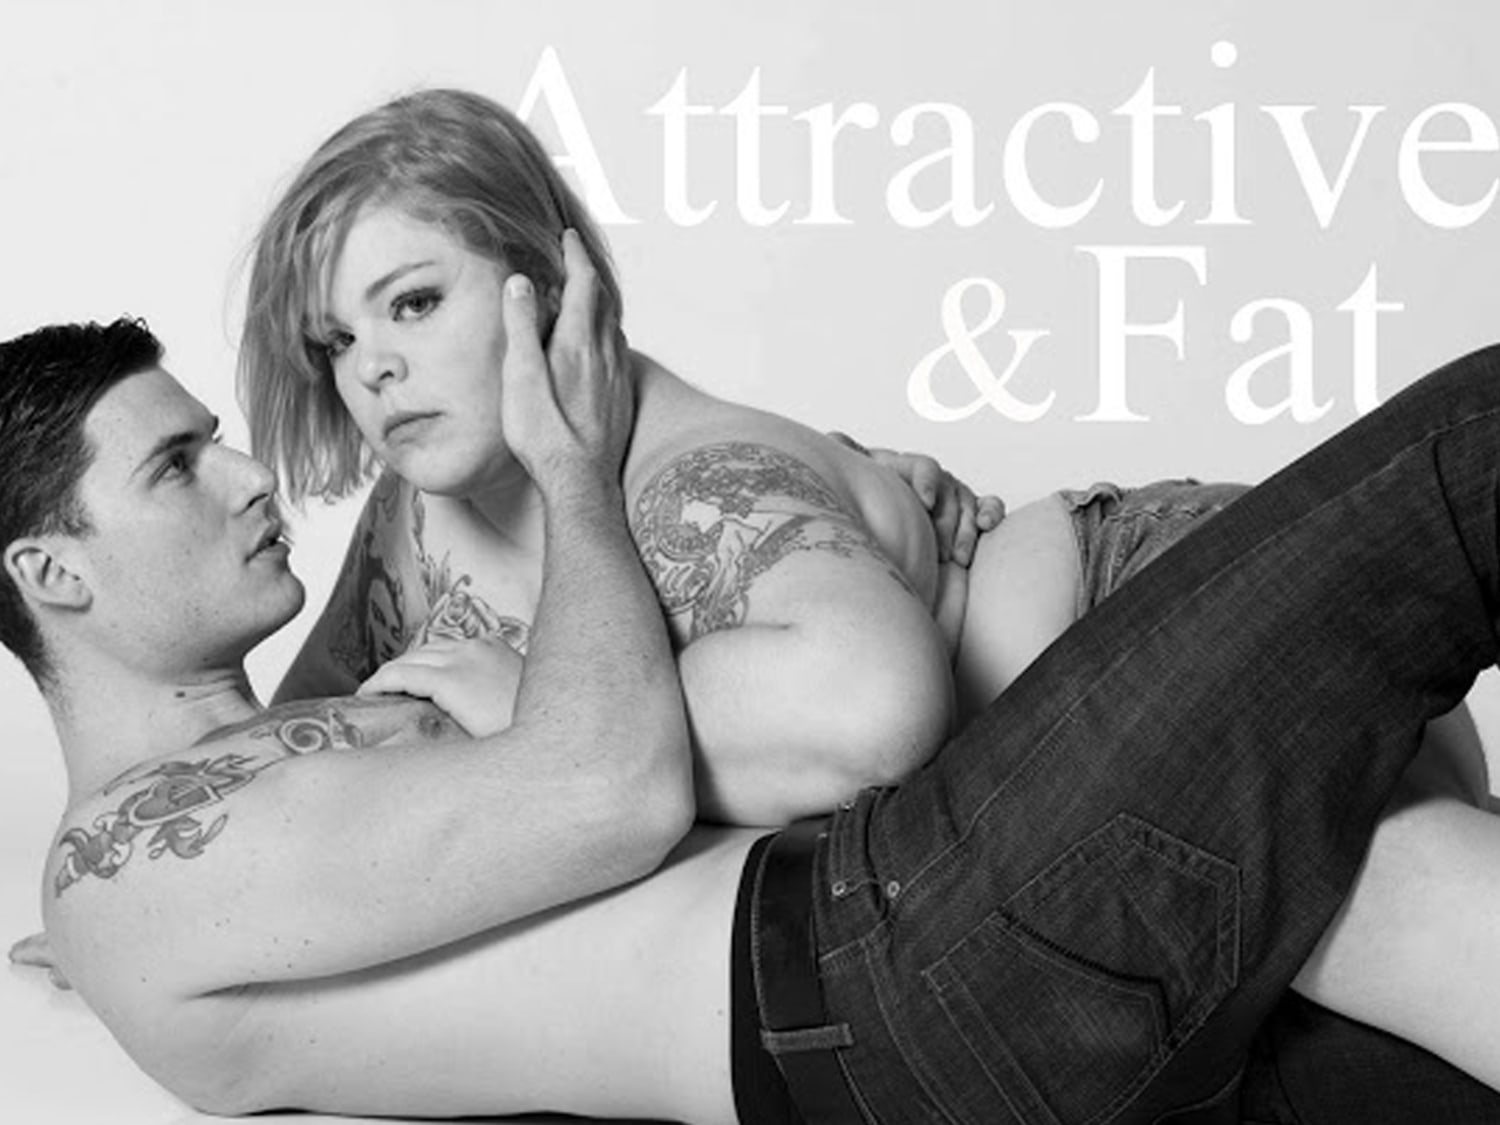 Blogger to Abercrombie & Fitch: A&F means 'Attractive & Fat'